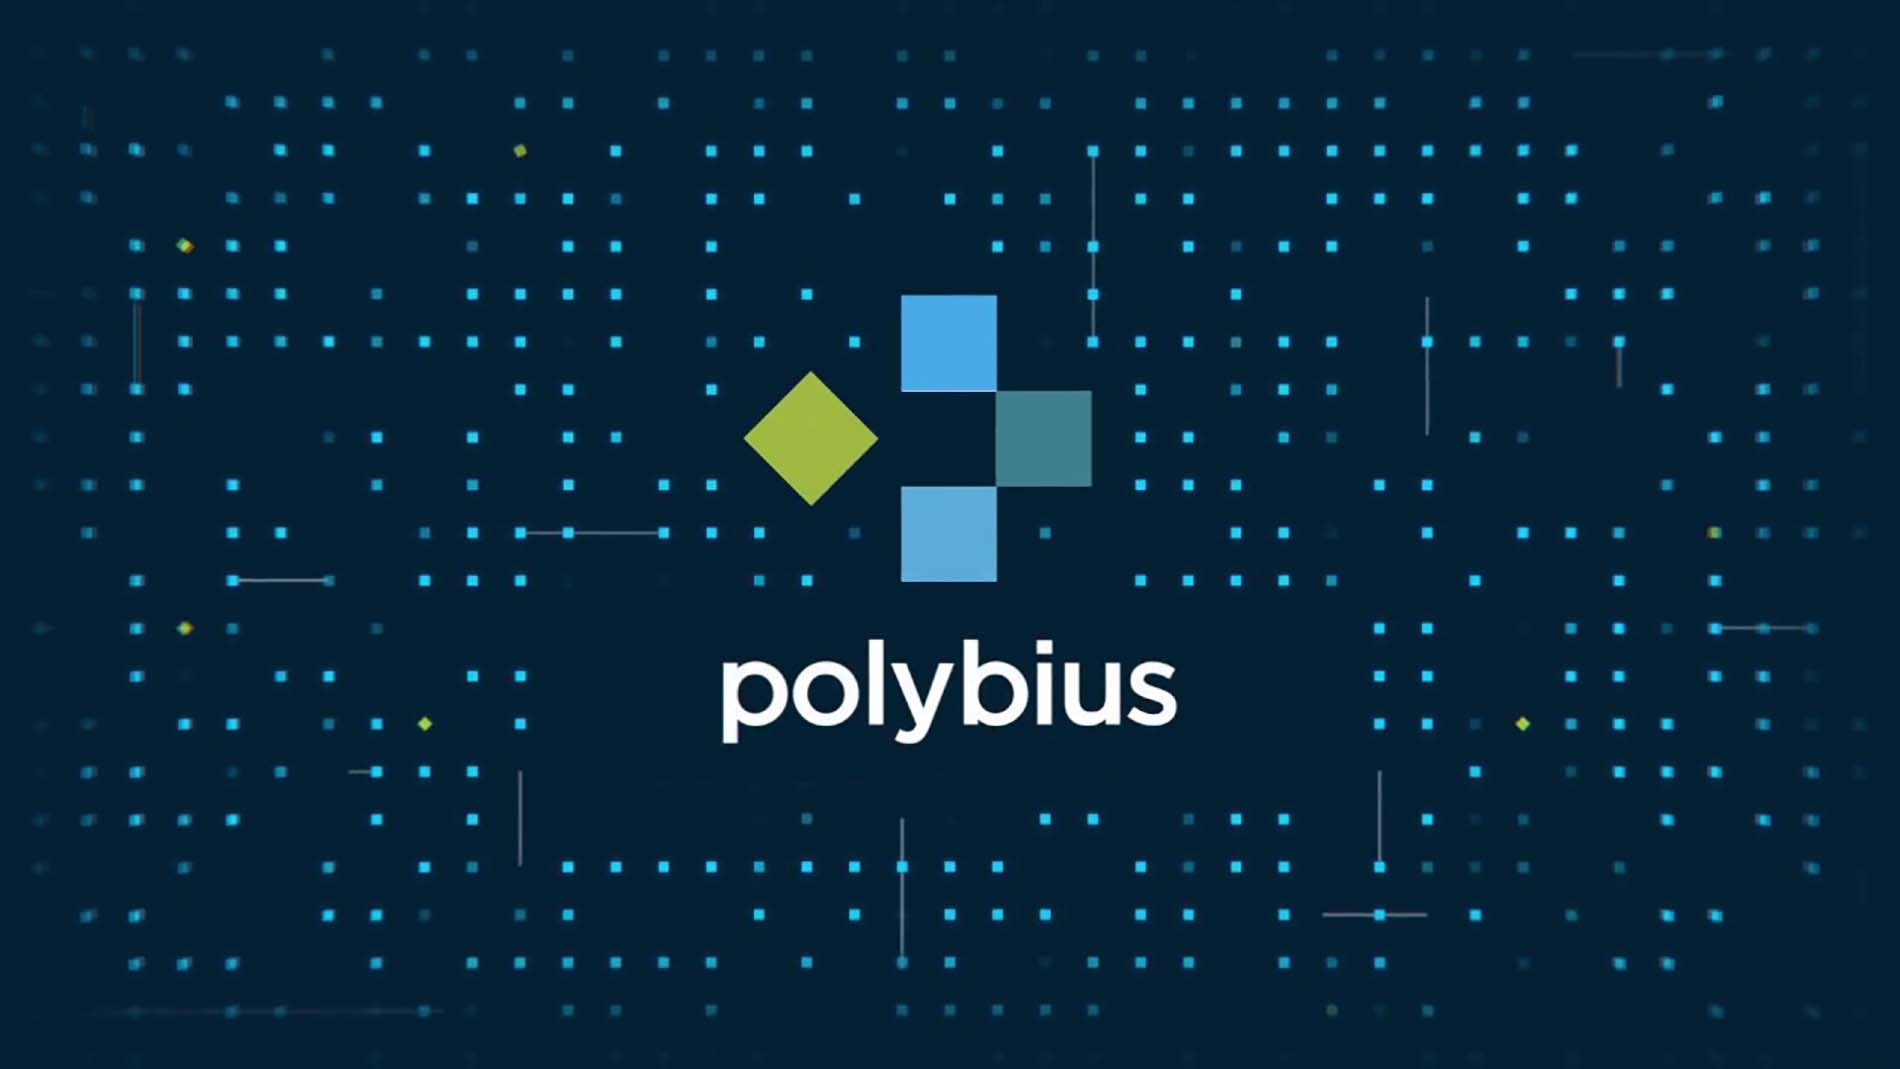 Over 500k Early Adopters to Participate in Upcoming Polybius Project ICO